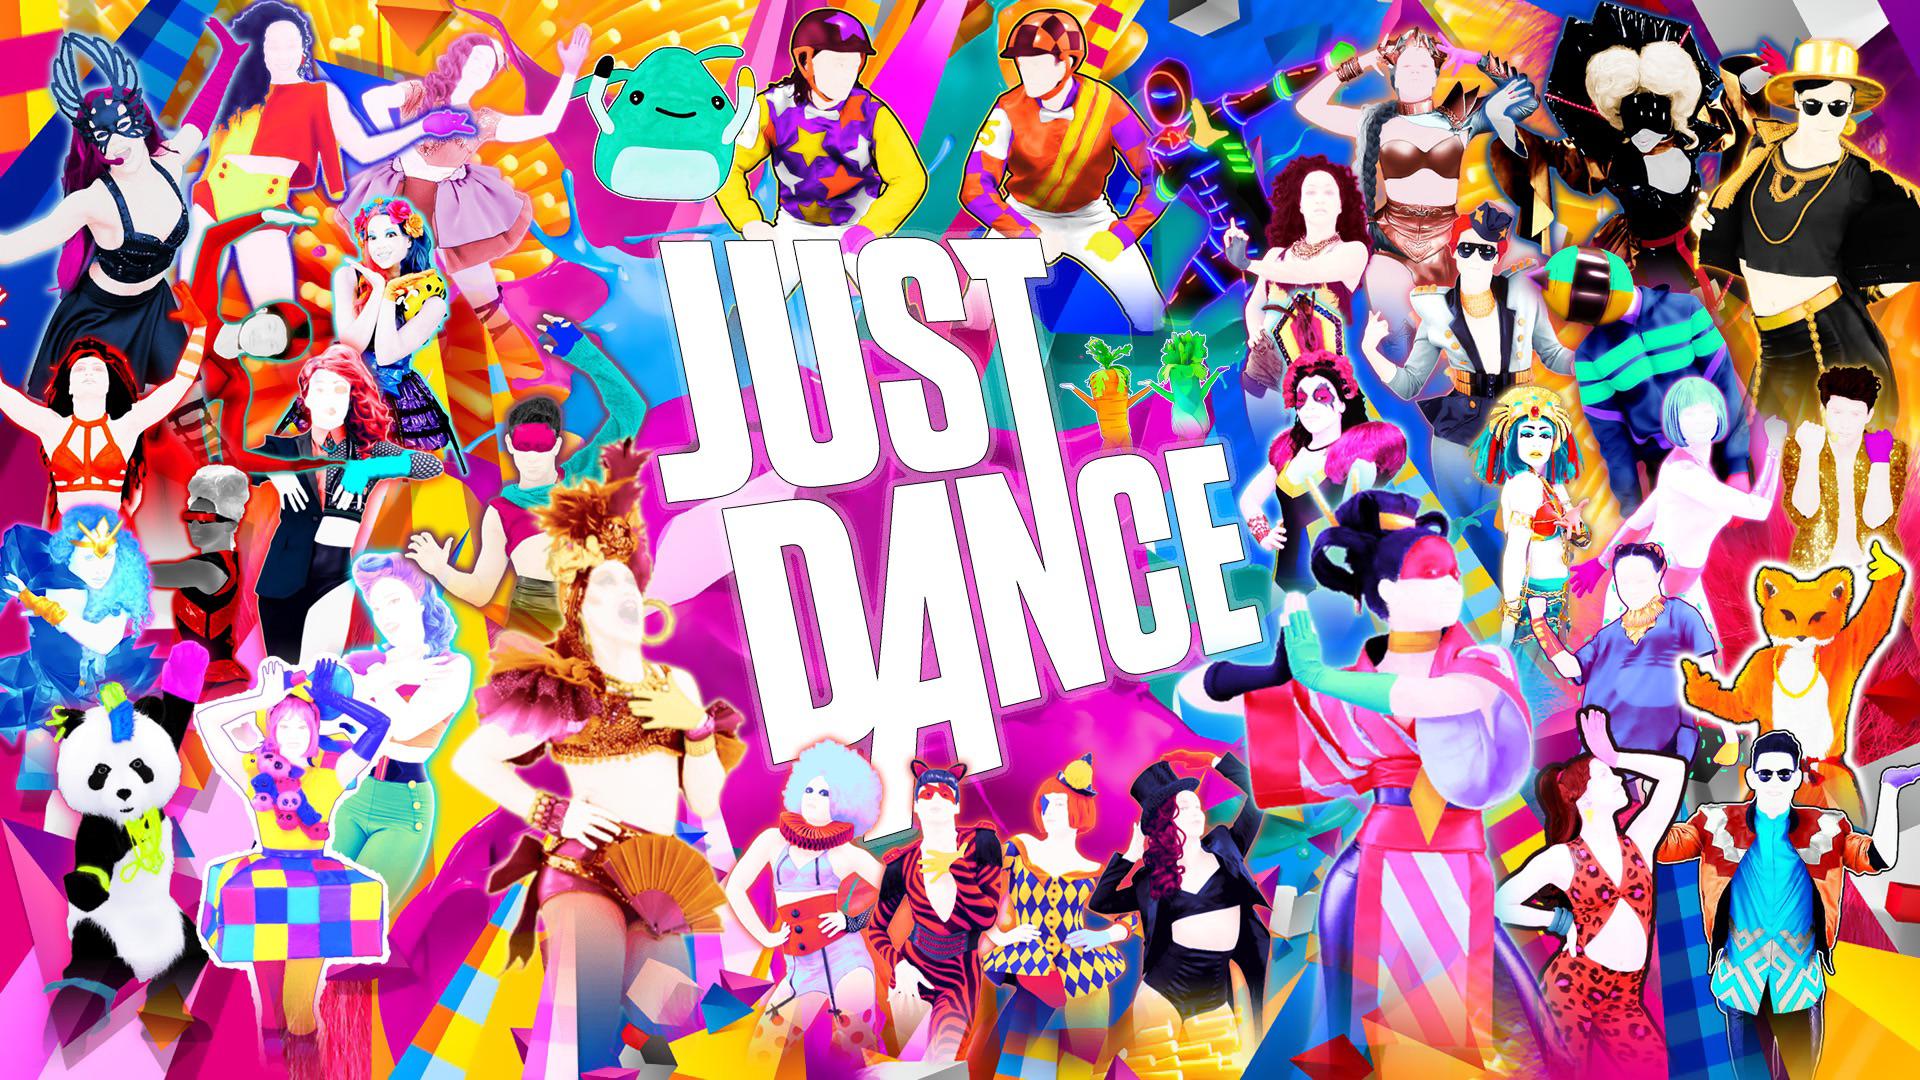 Just Dance poster